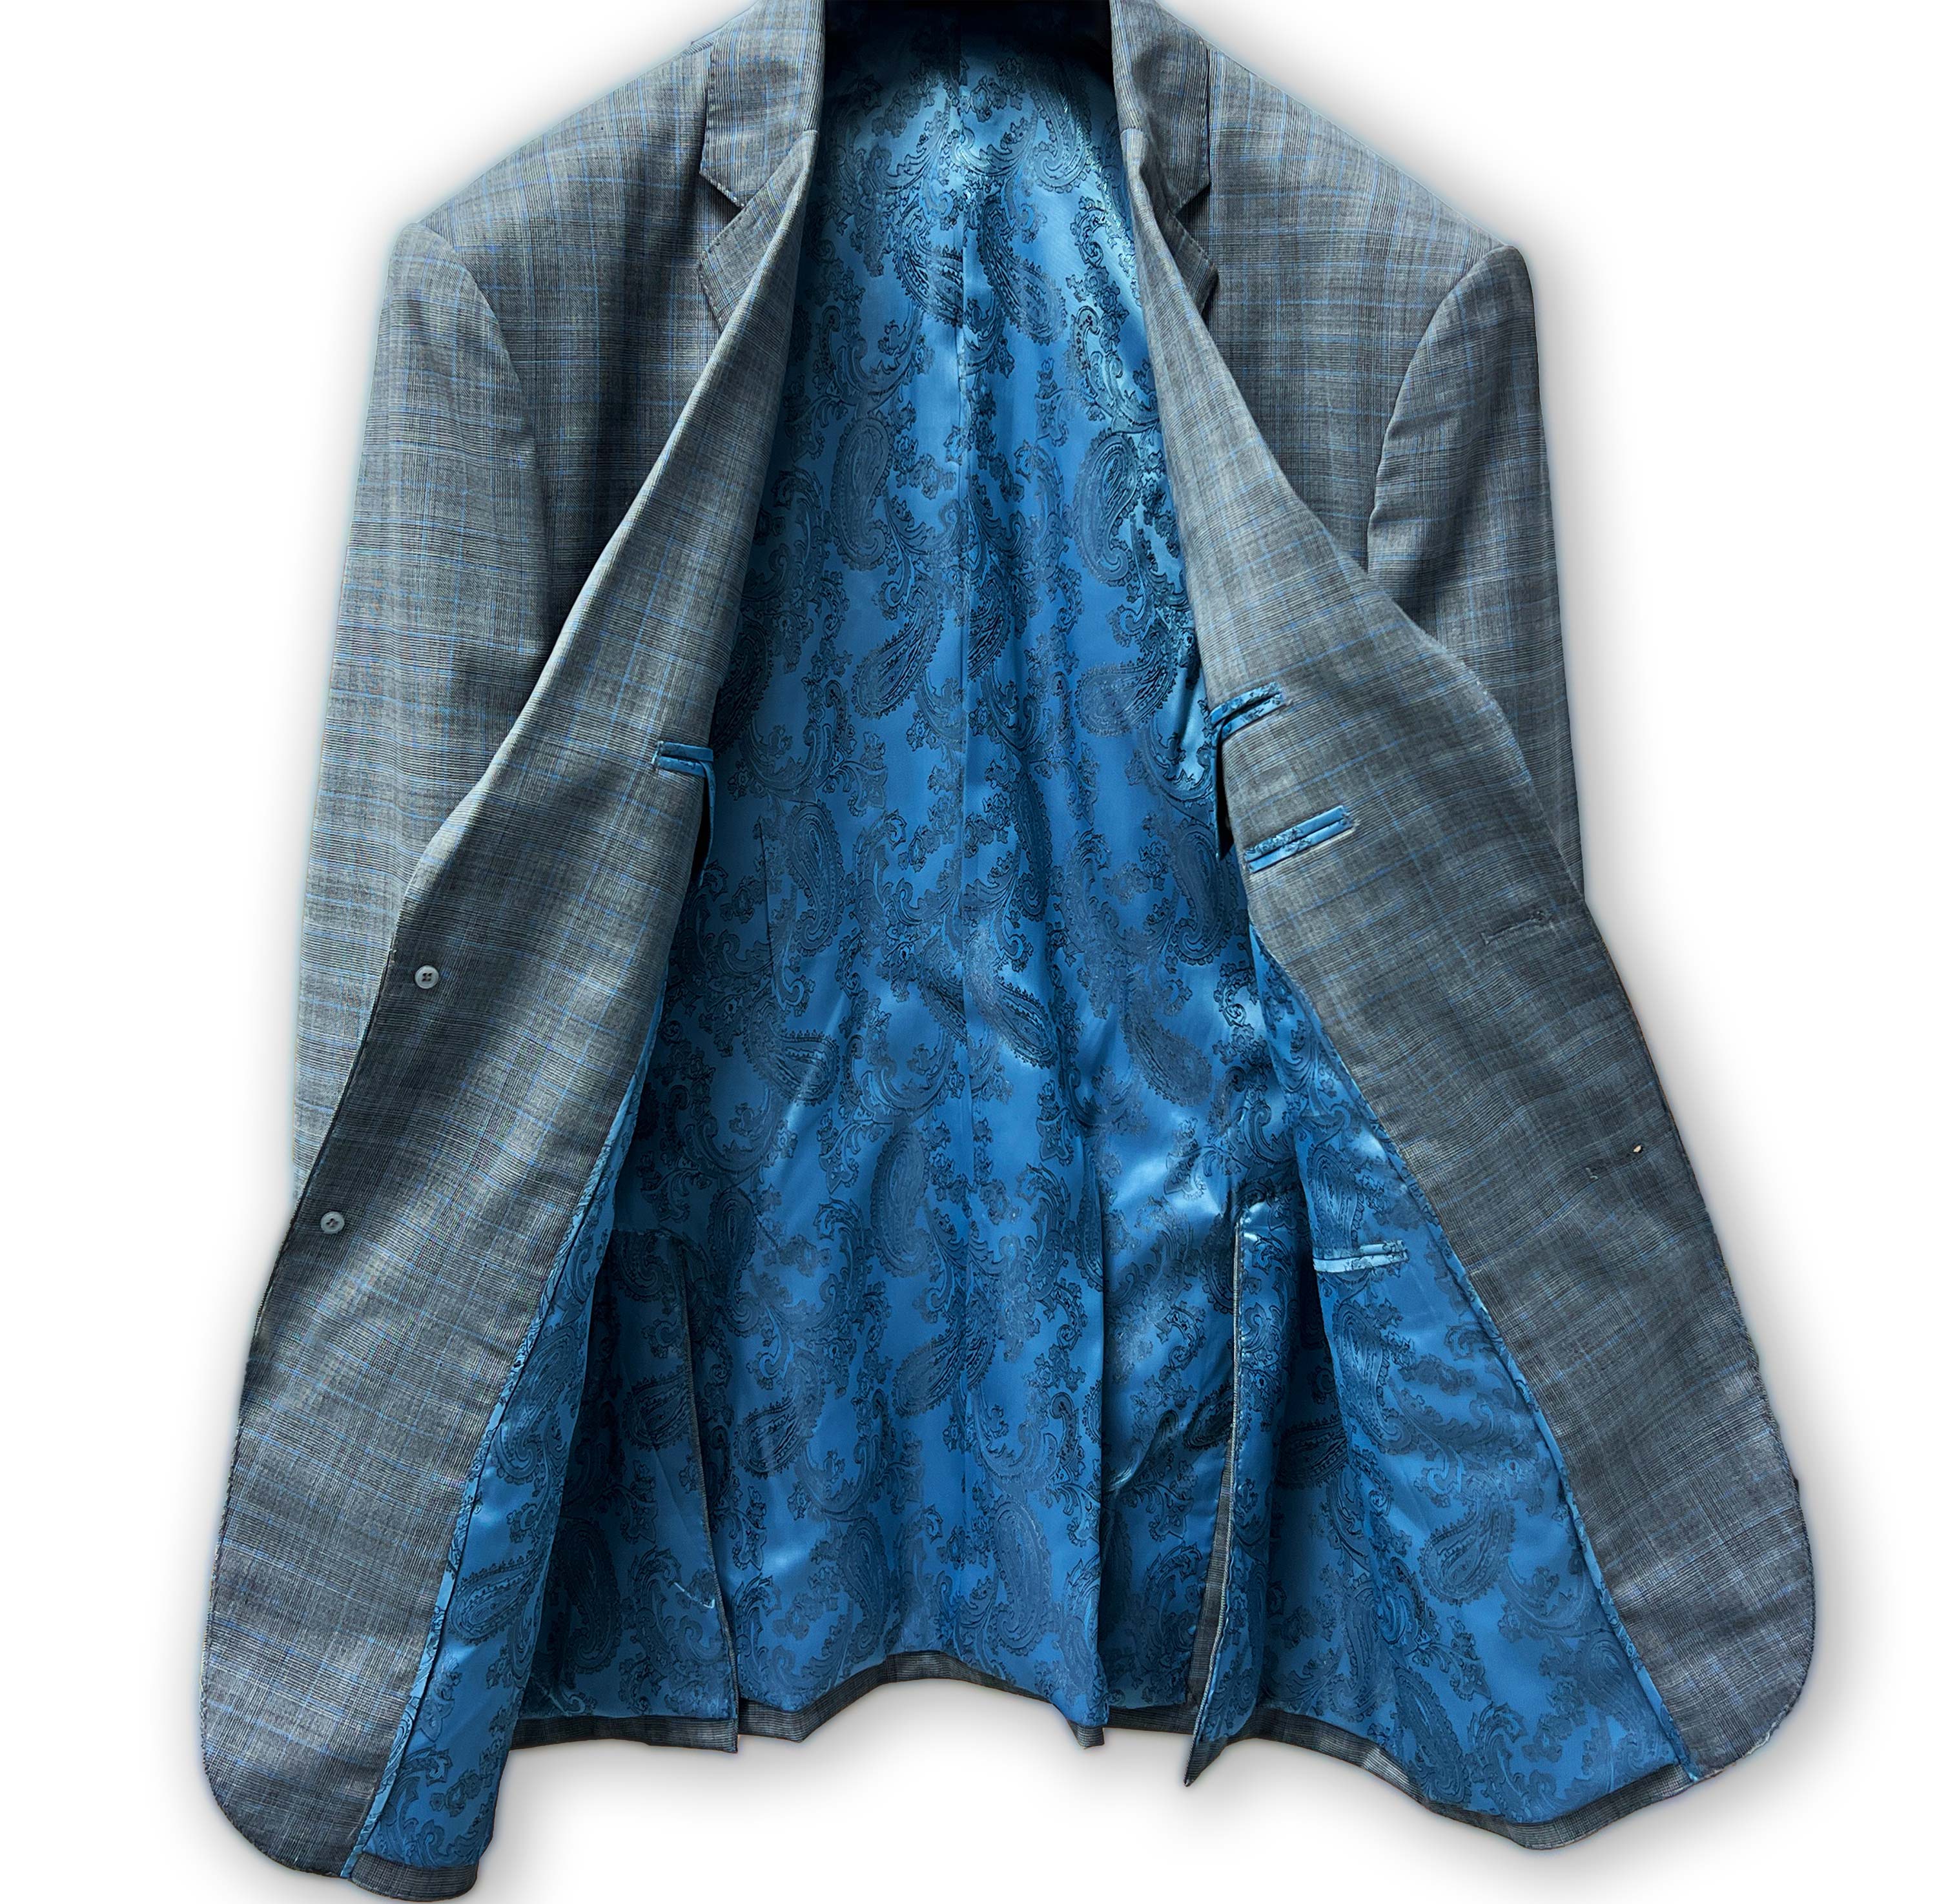 Tailored Glen Plaid suit with a custom touch by Westwood Hart.